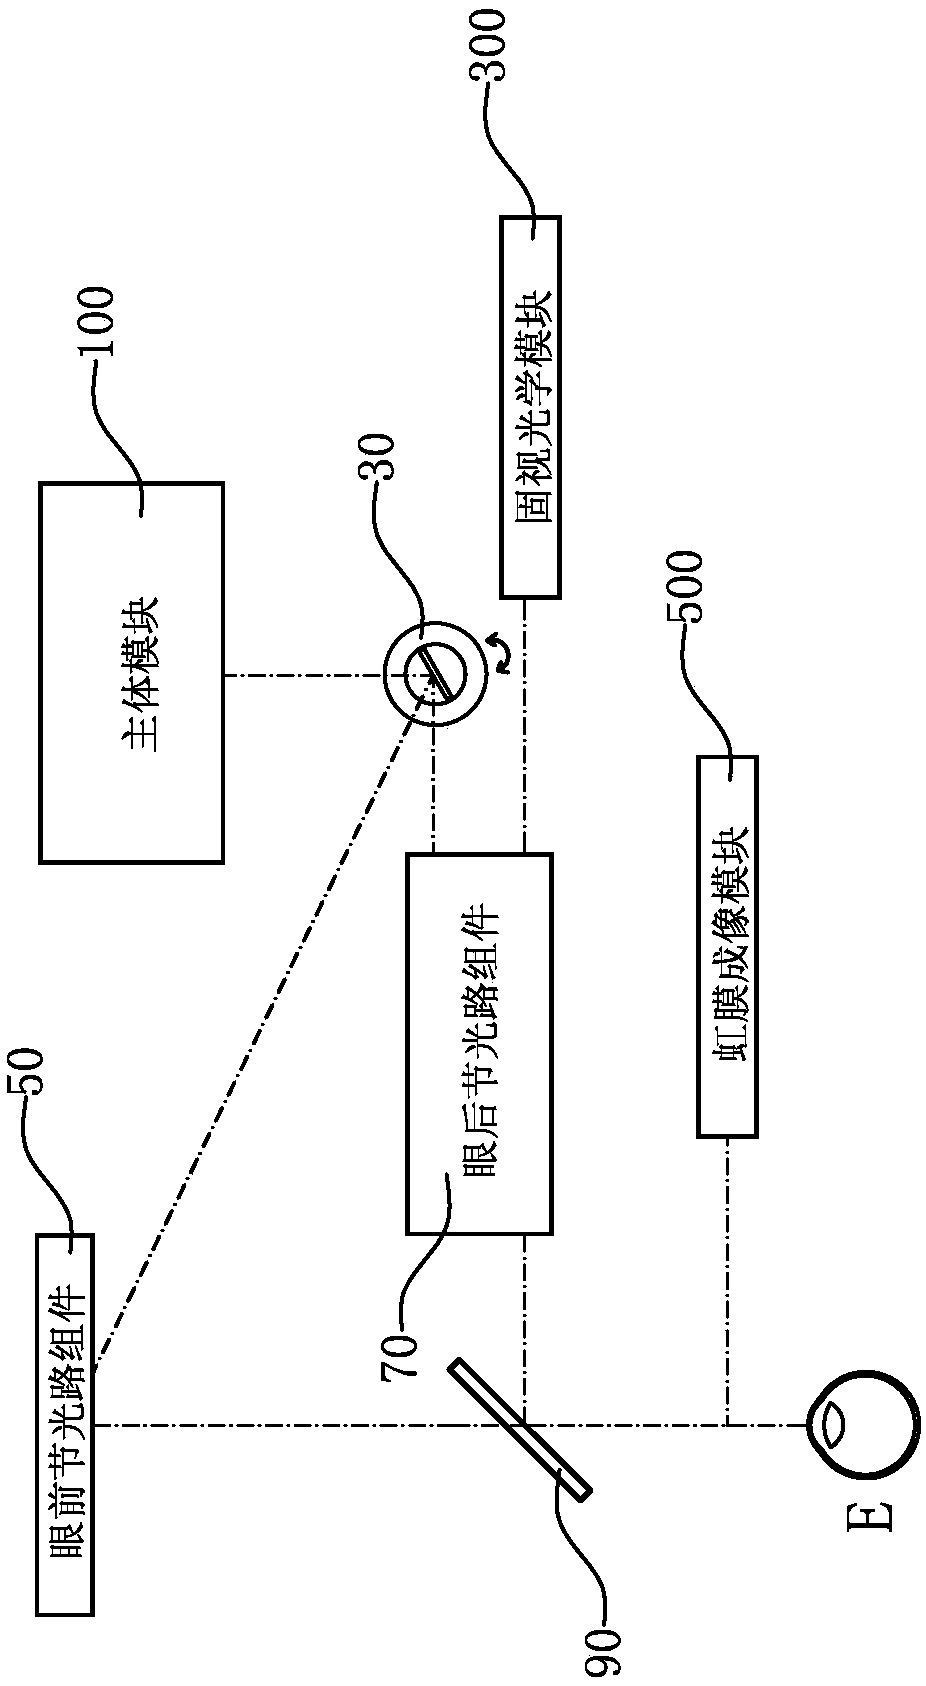 Ophthalmic measurement system and method